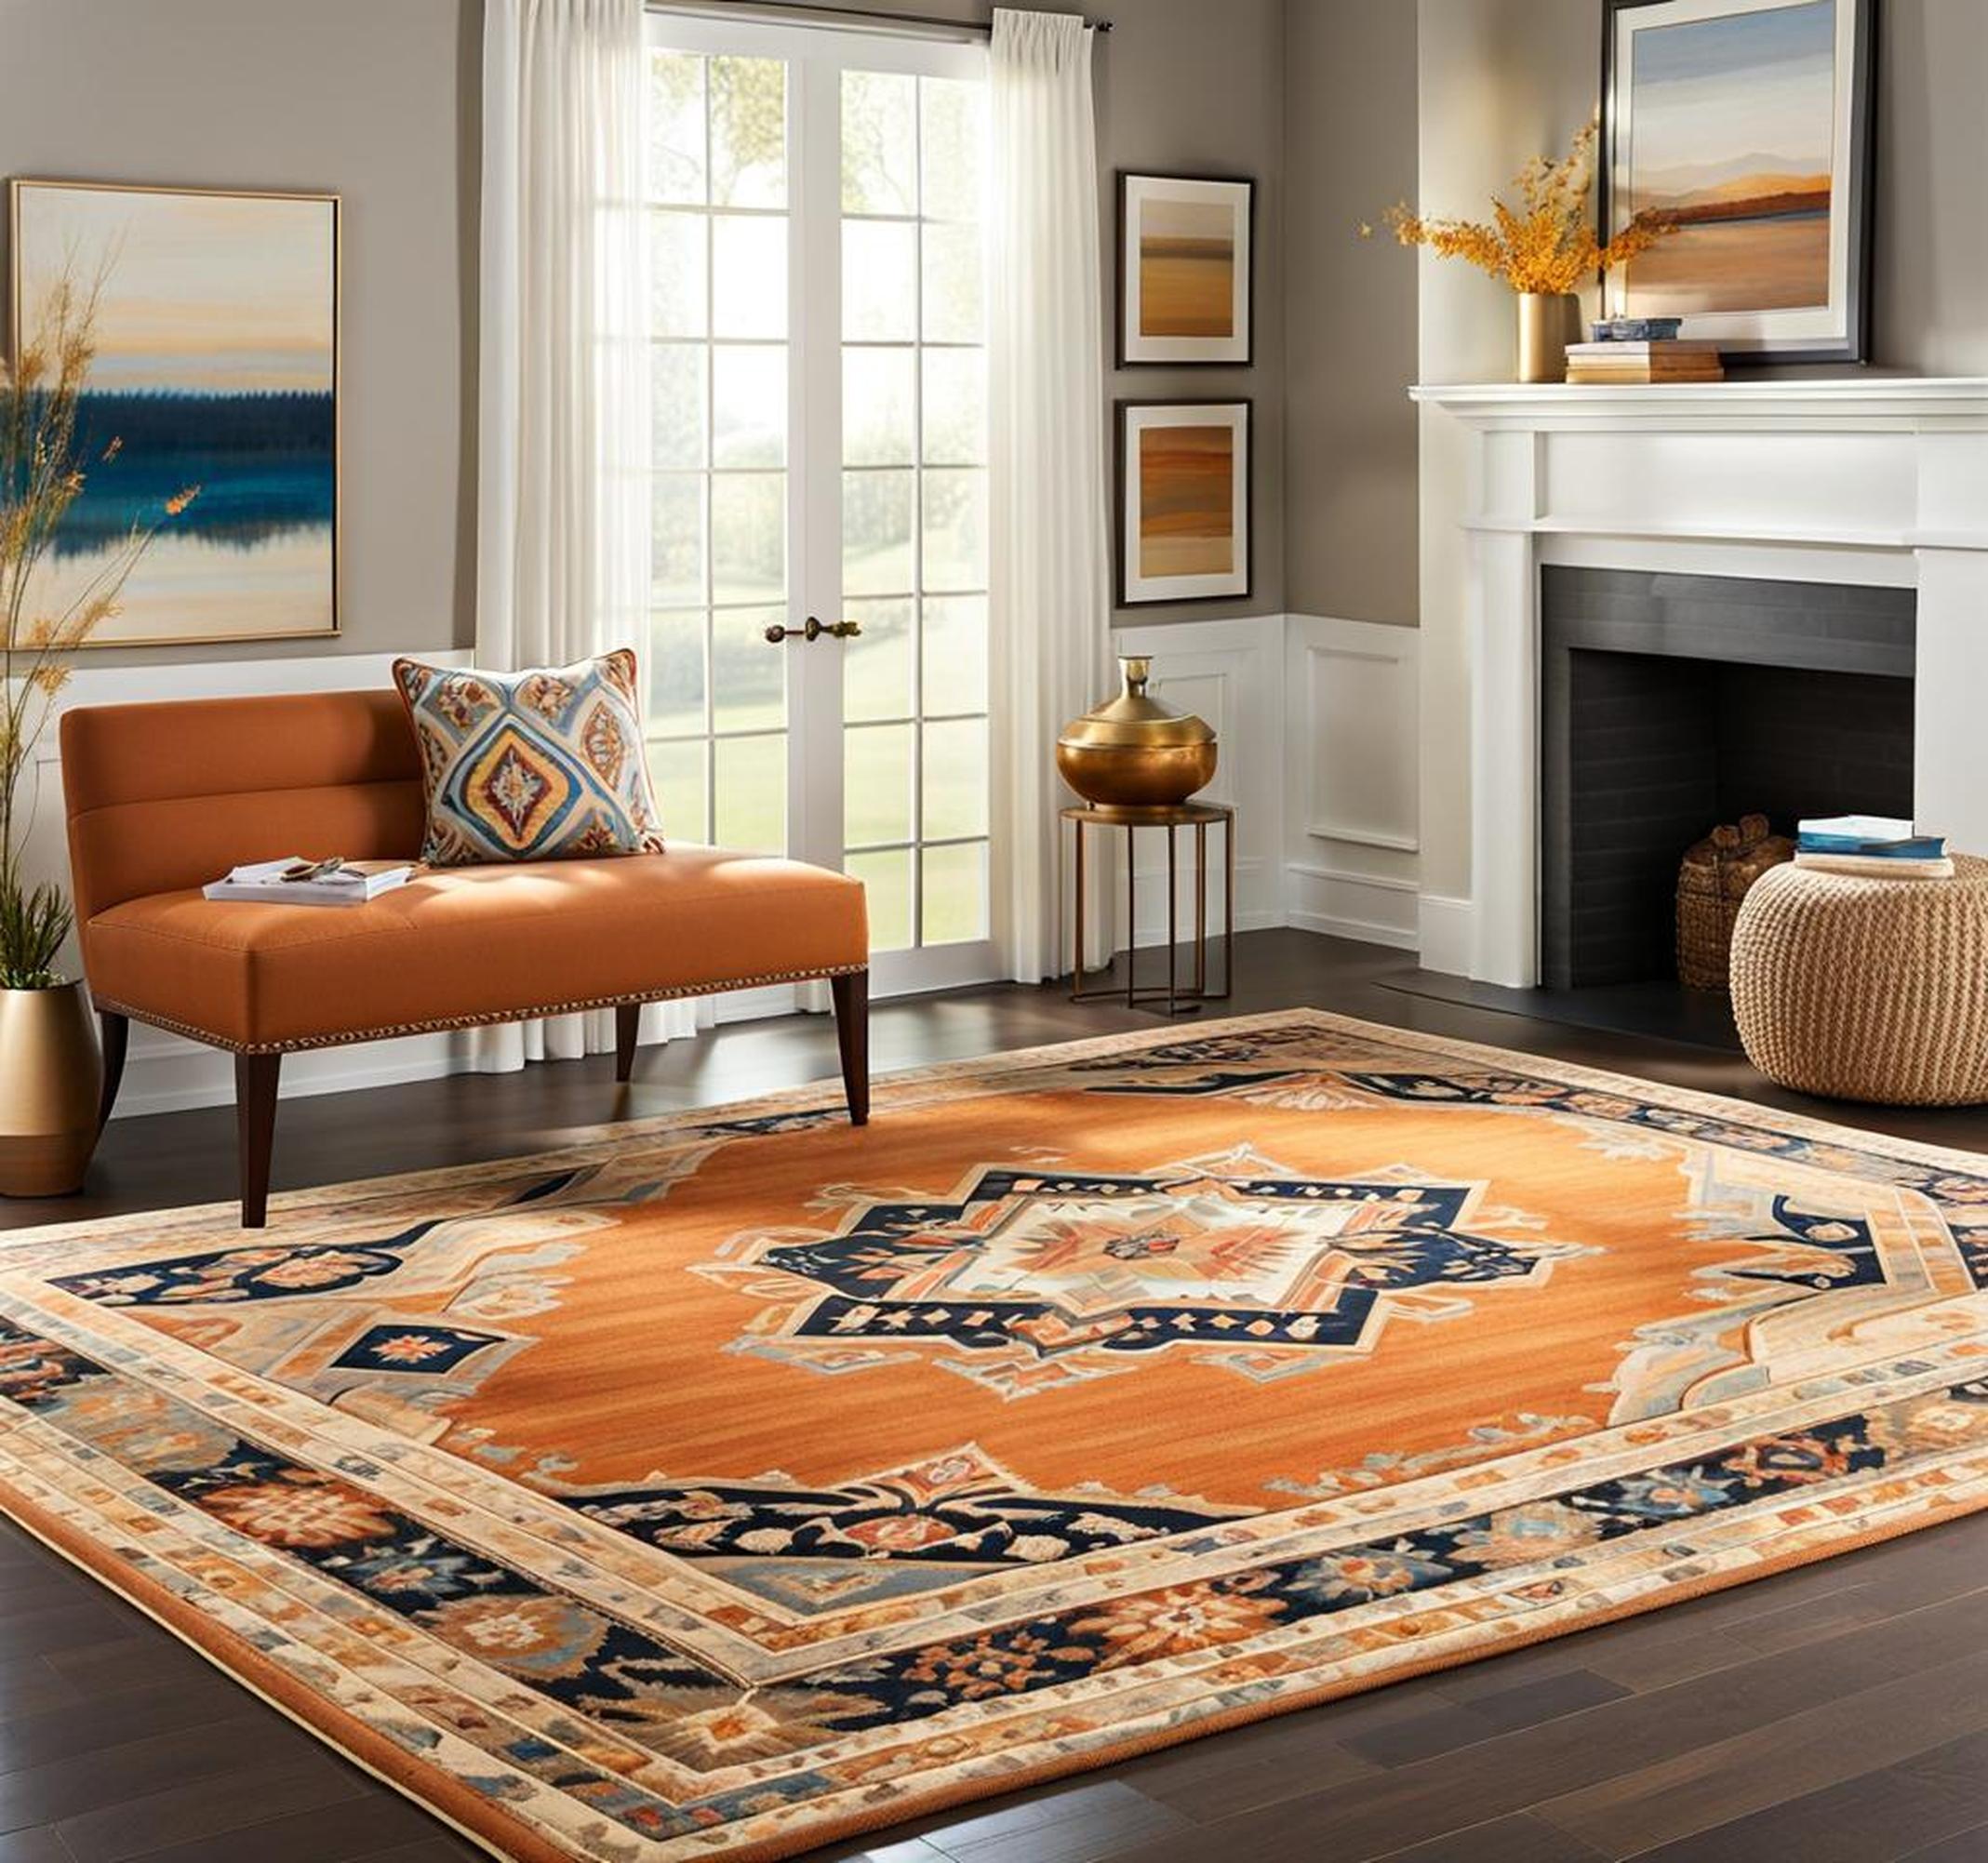 10x12 area rugs for living room